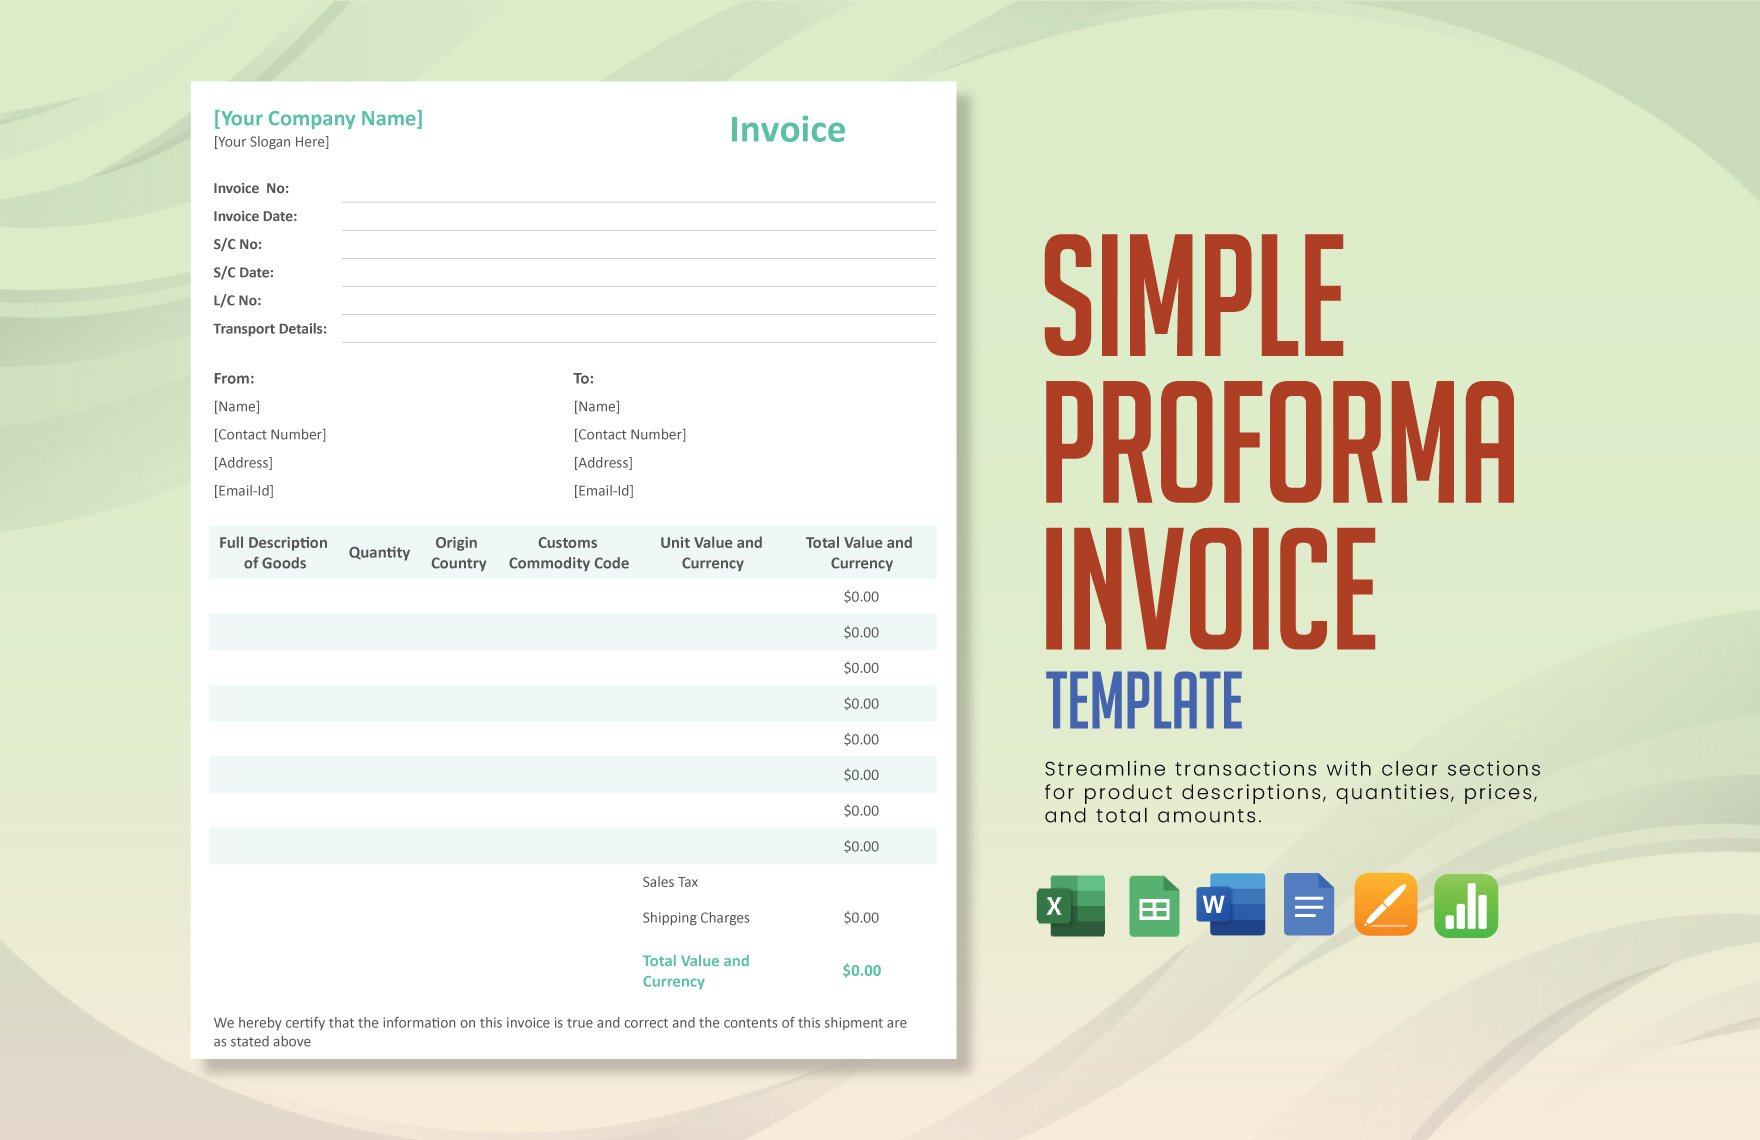 Simple Proforma Invoice Template in Word, Google Docs, Excel, Google Sheets, Apple Pages, Apple Numbers